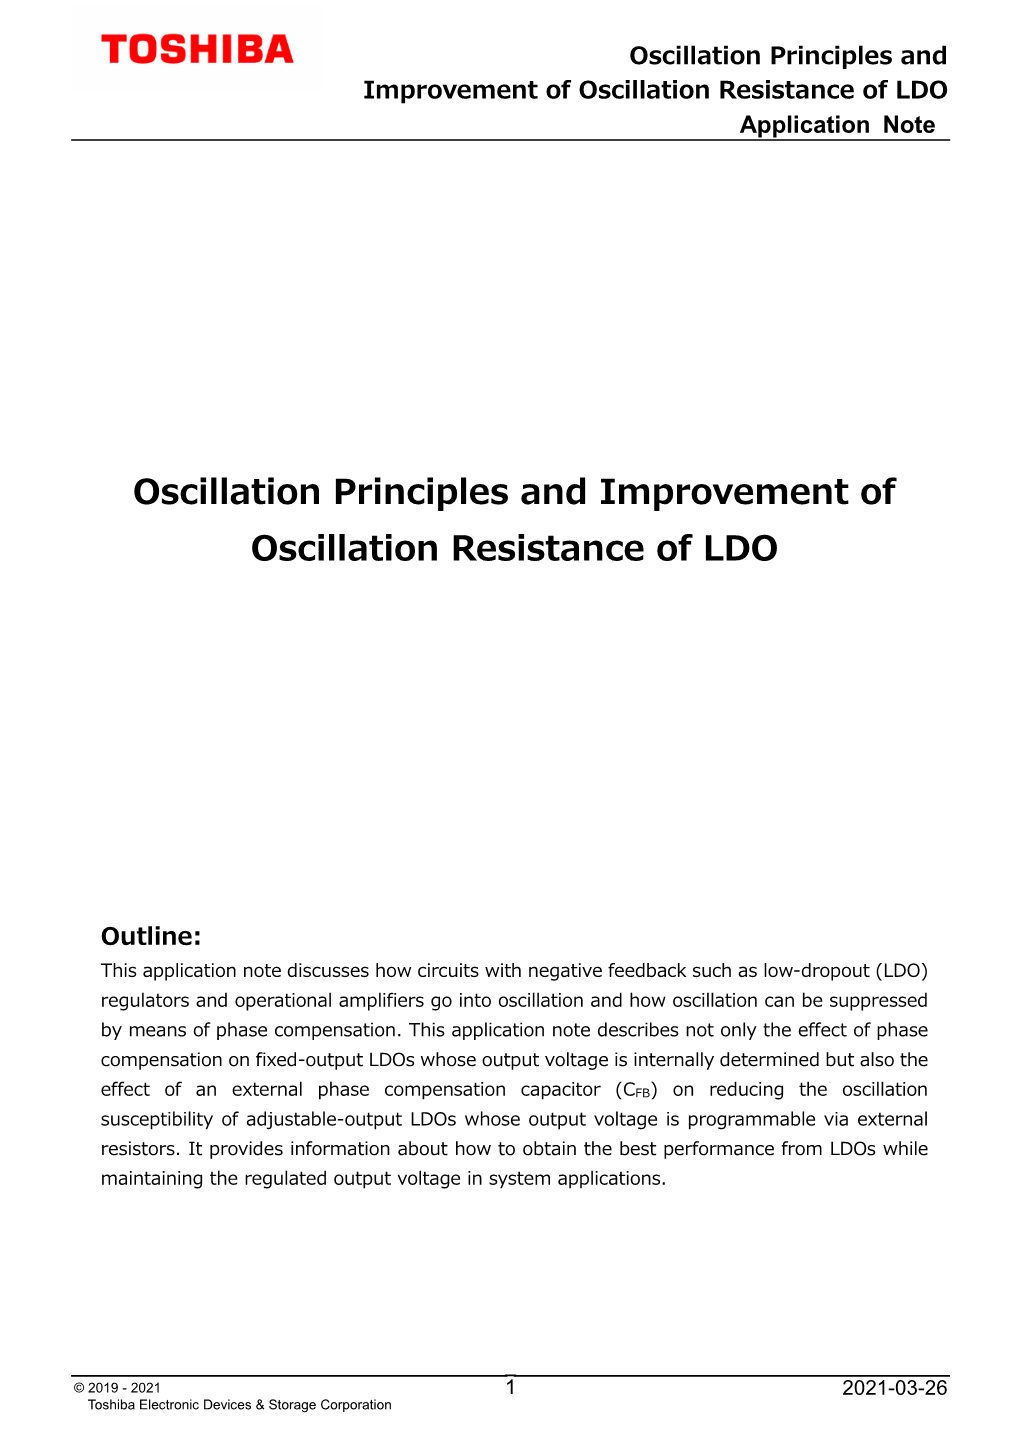 Mechanism of LDO Oscillation and Reducing the Susceptibility To